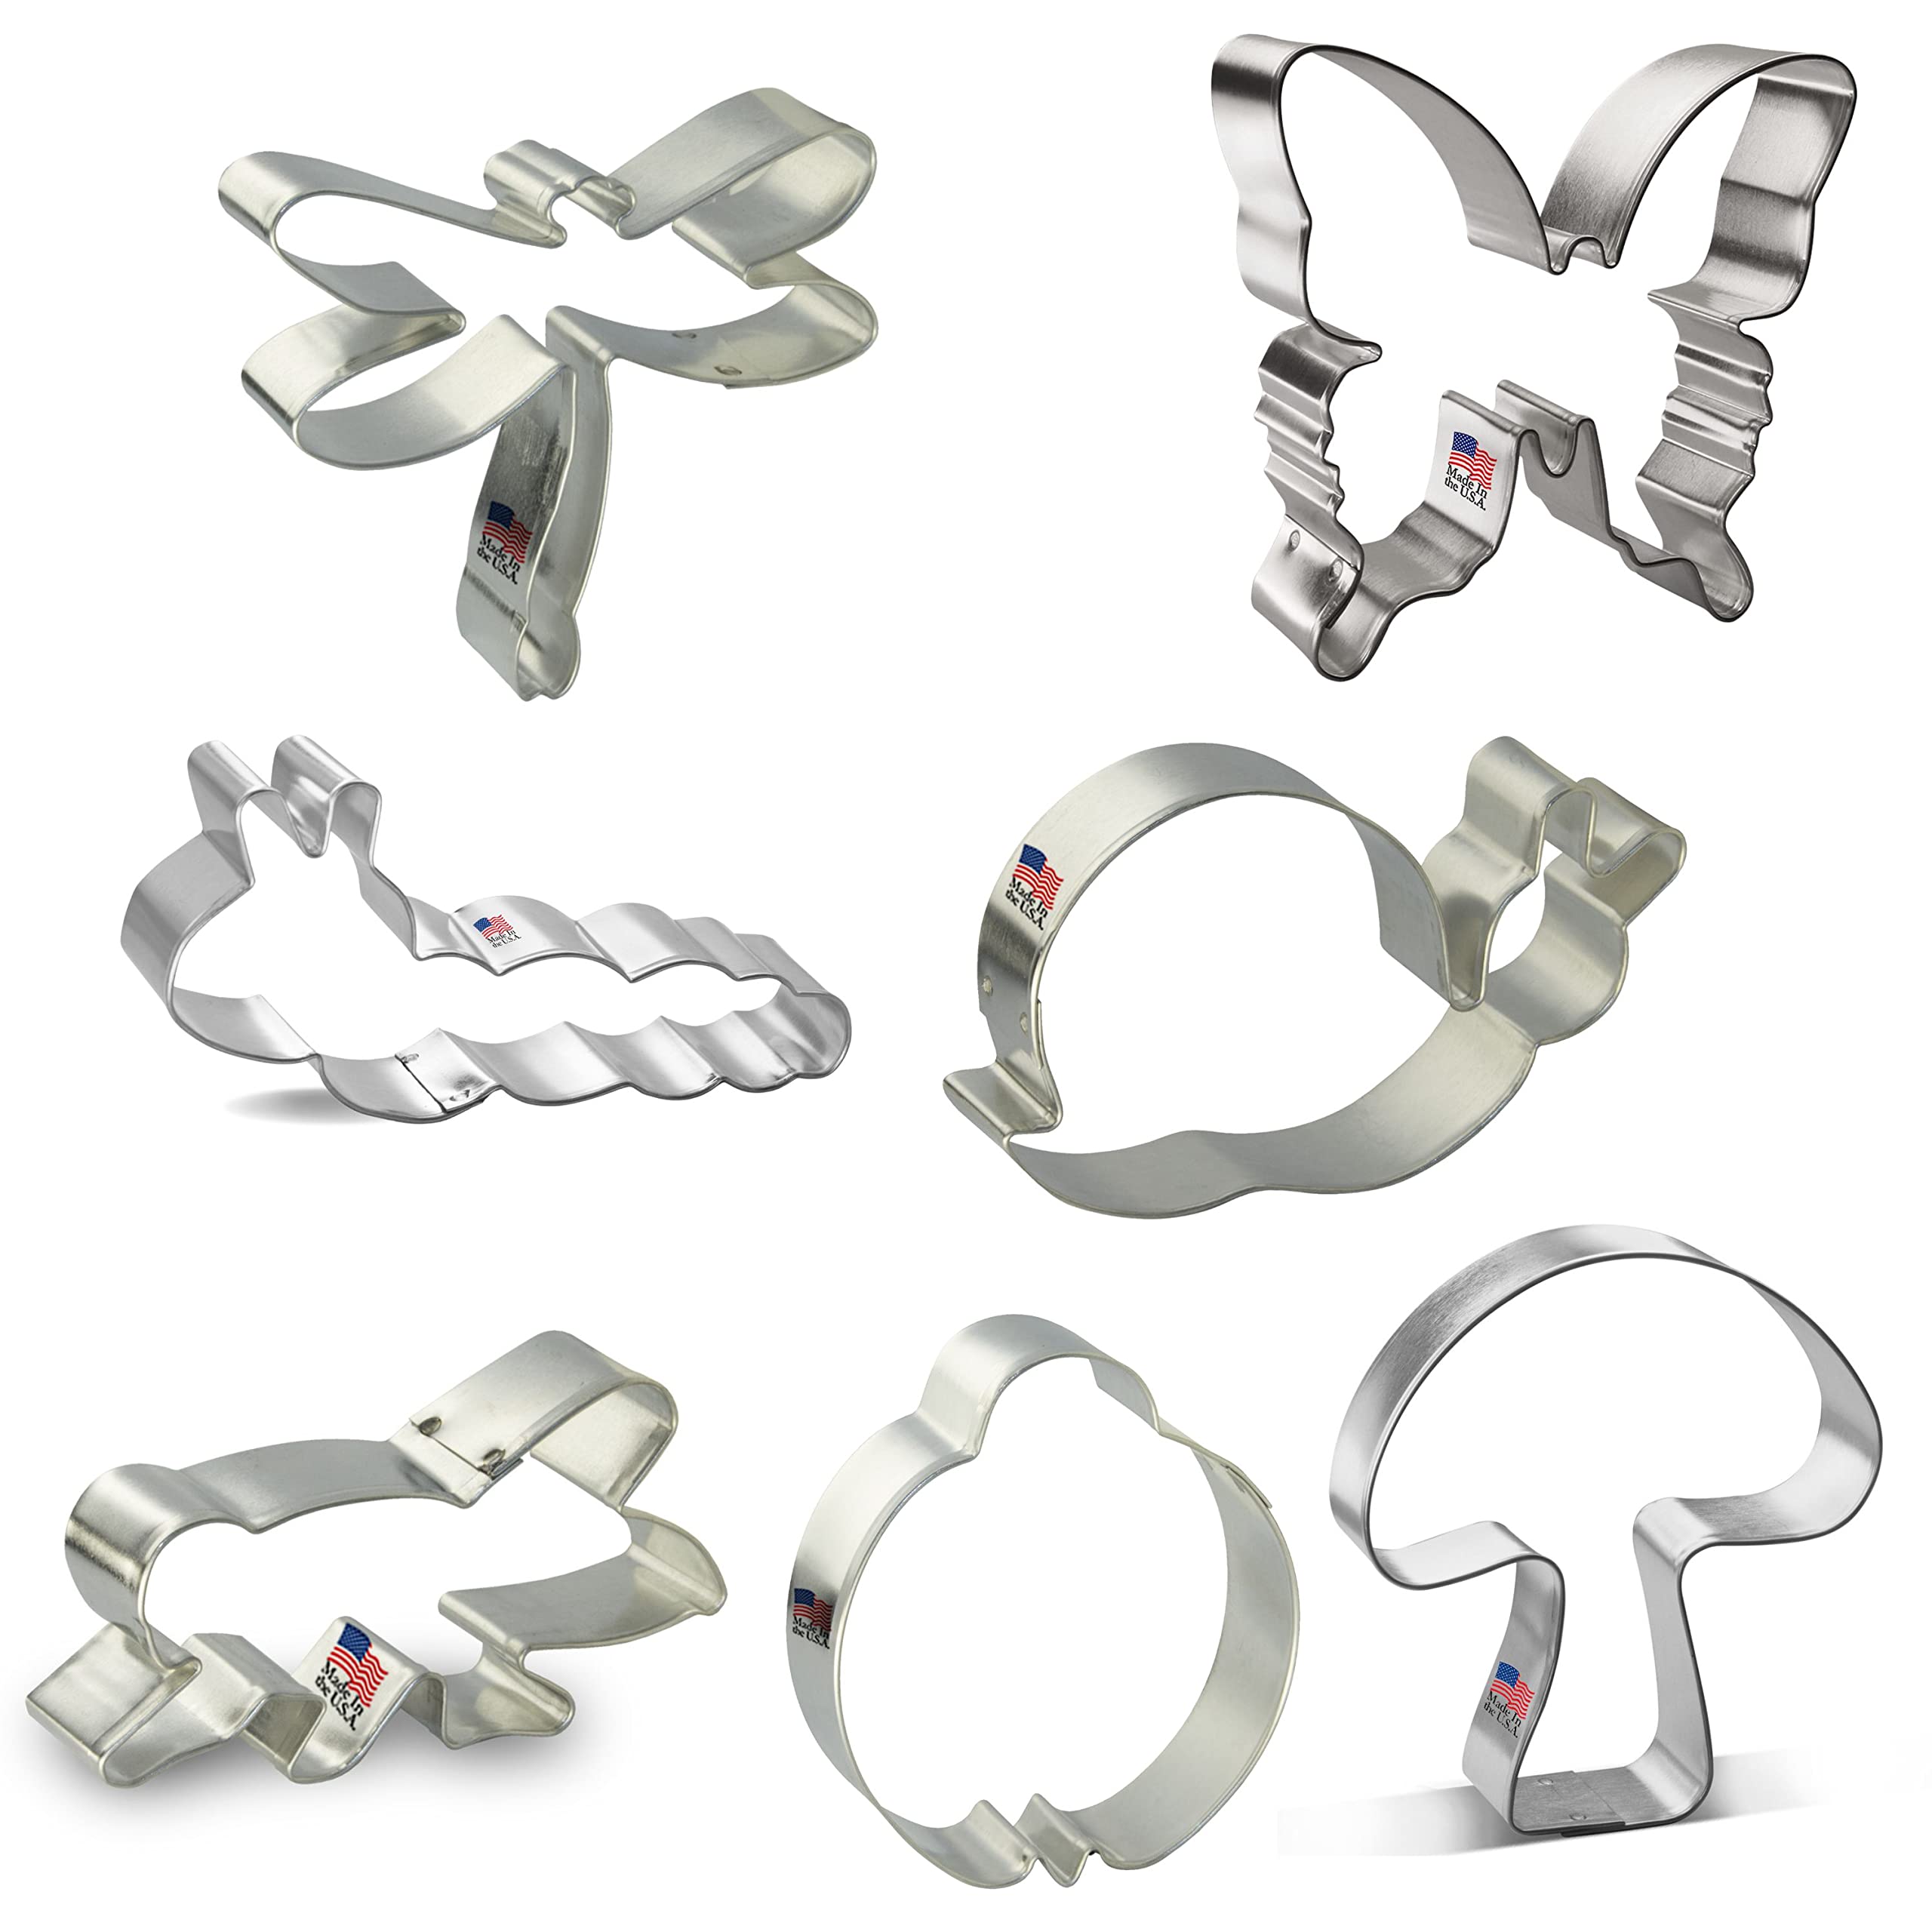 Foose Cookie Cutter 7 Piece Insect 3.5 in Dragonfly, 4.25 in Caterpillar, 3 in Ladybug, 4.5 in Butterfly, 3.5 in Grasshopper, 4.25 in Snail, 3.25 in Mushroom - USA Made